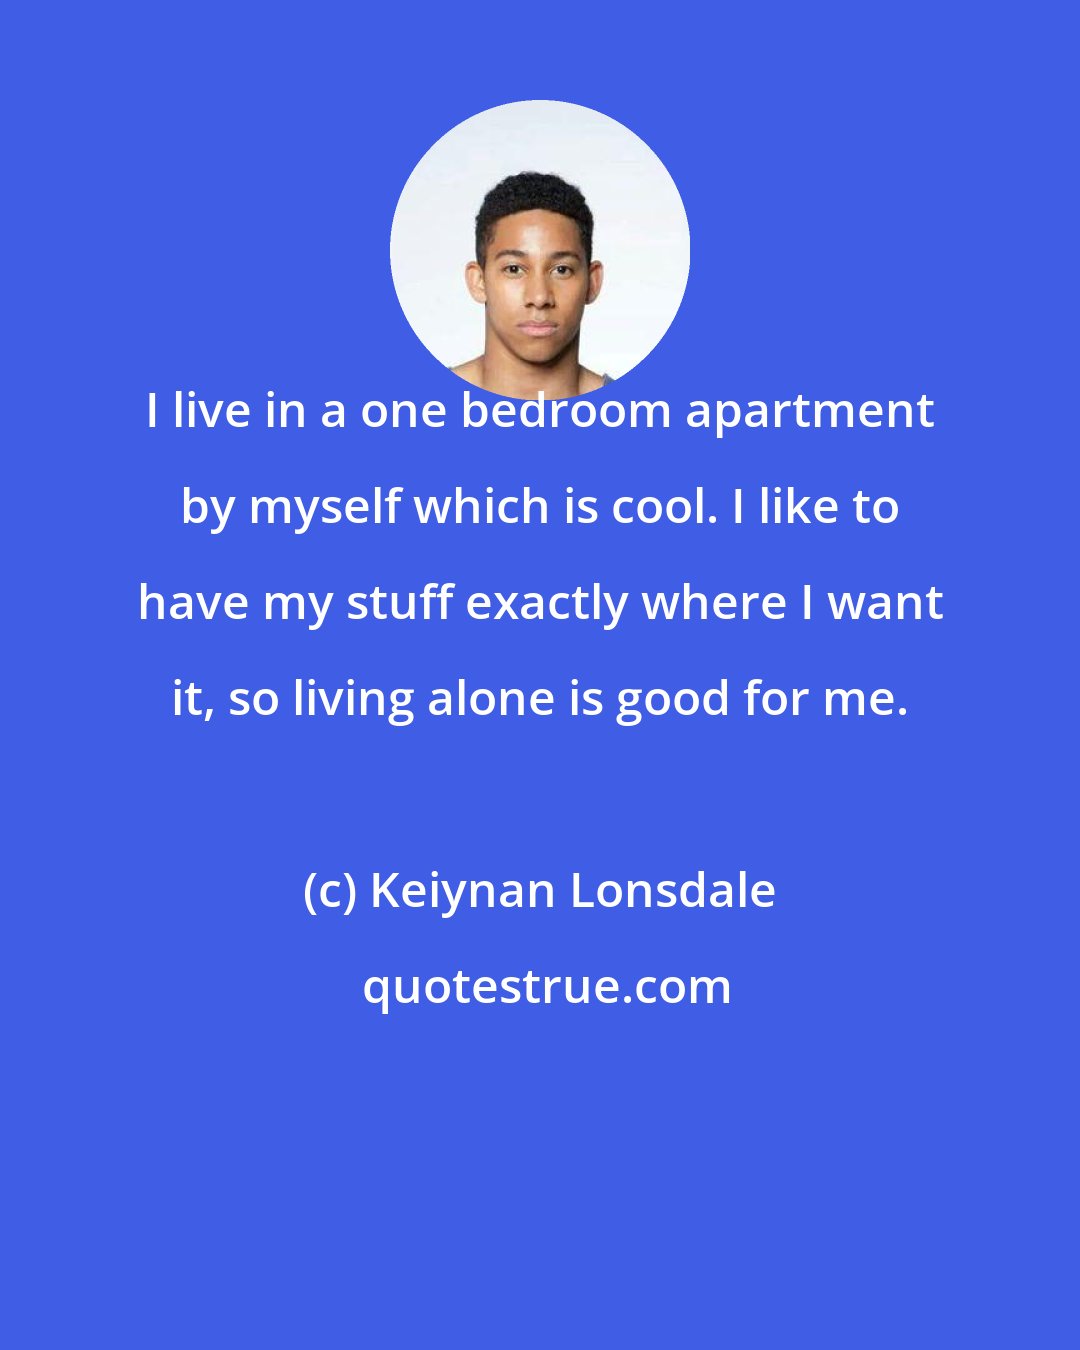 Keiynan Lonsdale: I live in a one bedroom apartment by myself which is cool. I like to have my stuff exactly where I want it, so living alone is good for me.